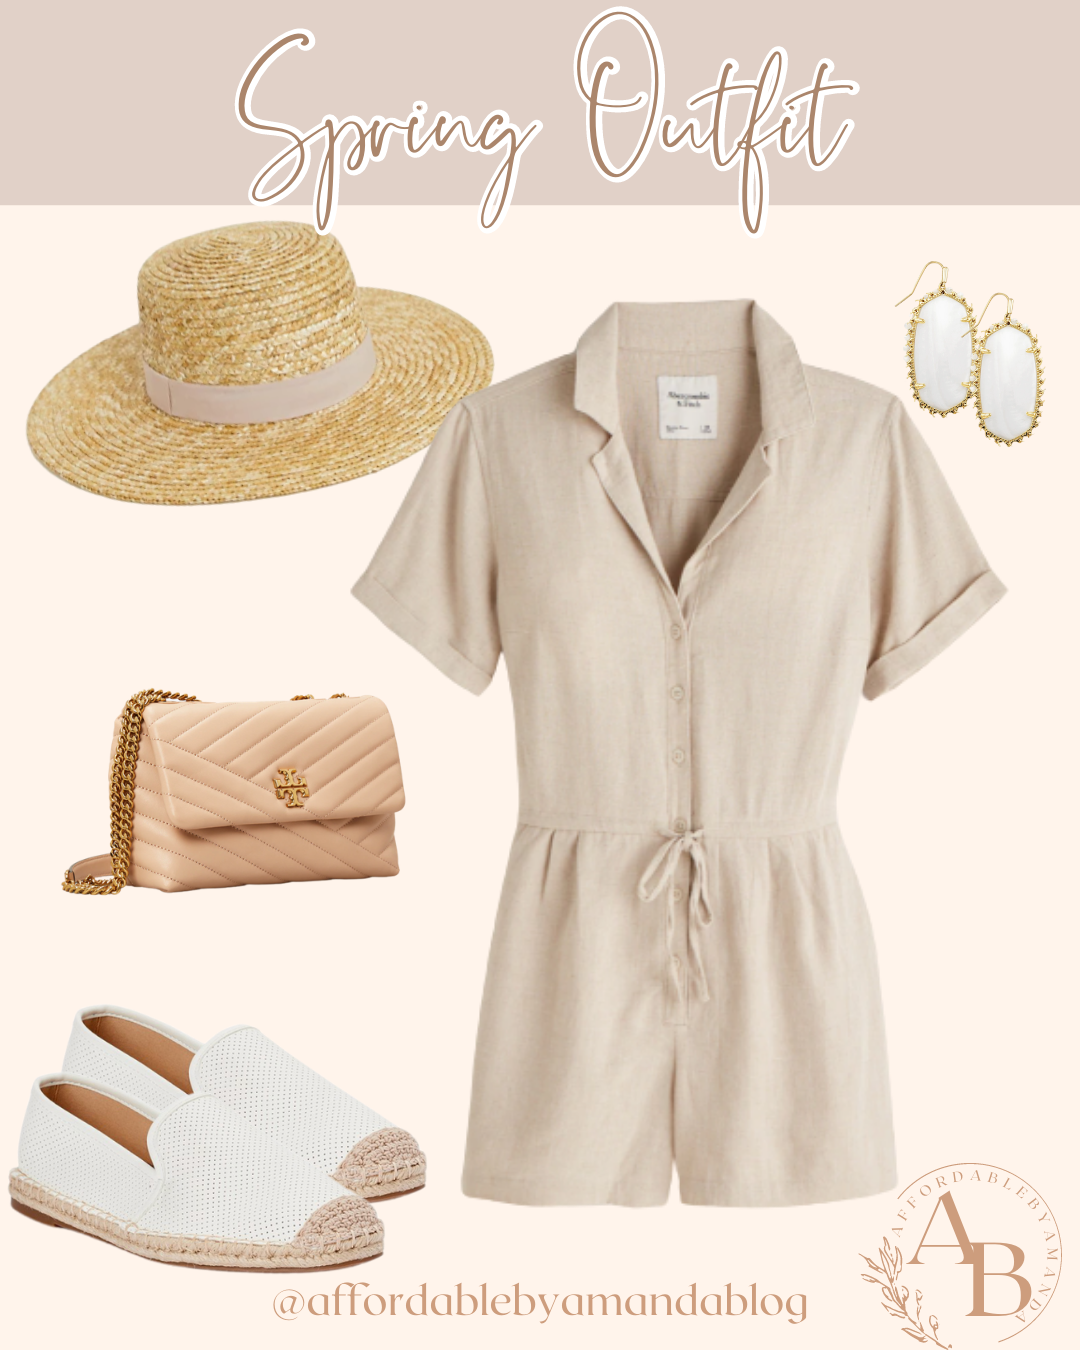 Cute Spring Outfits 2021 | Affordable by Amanda